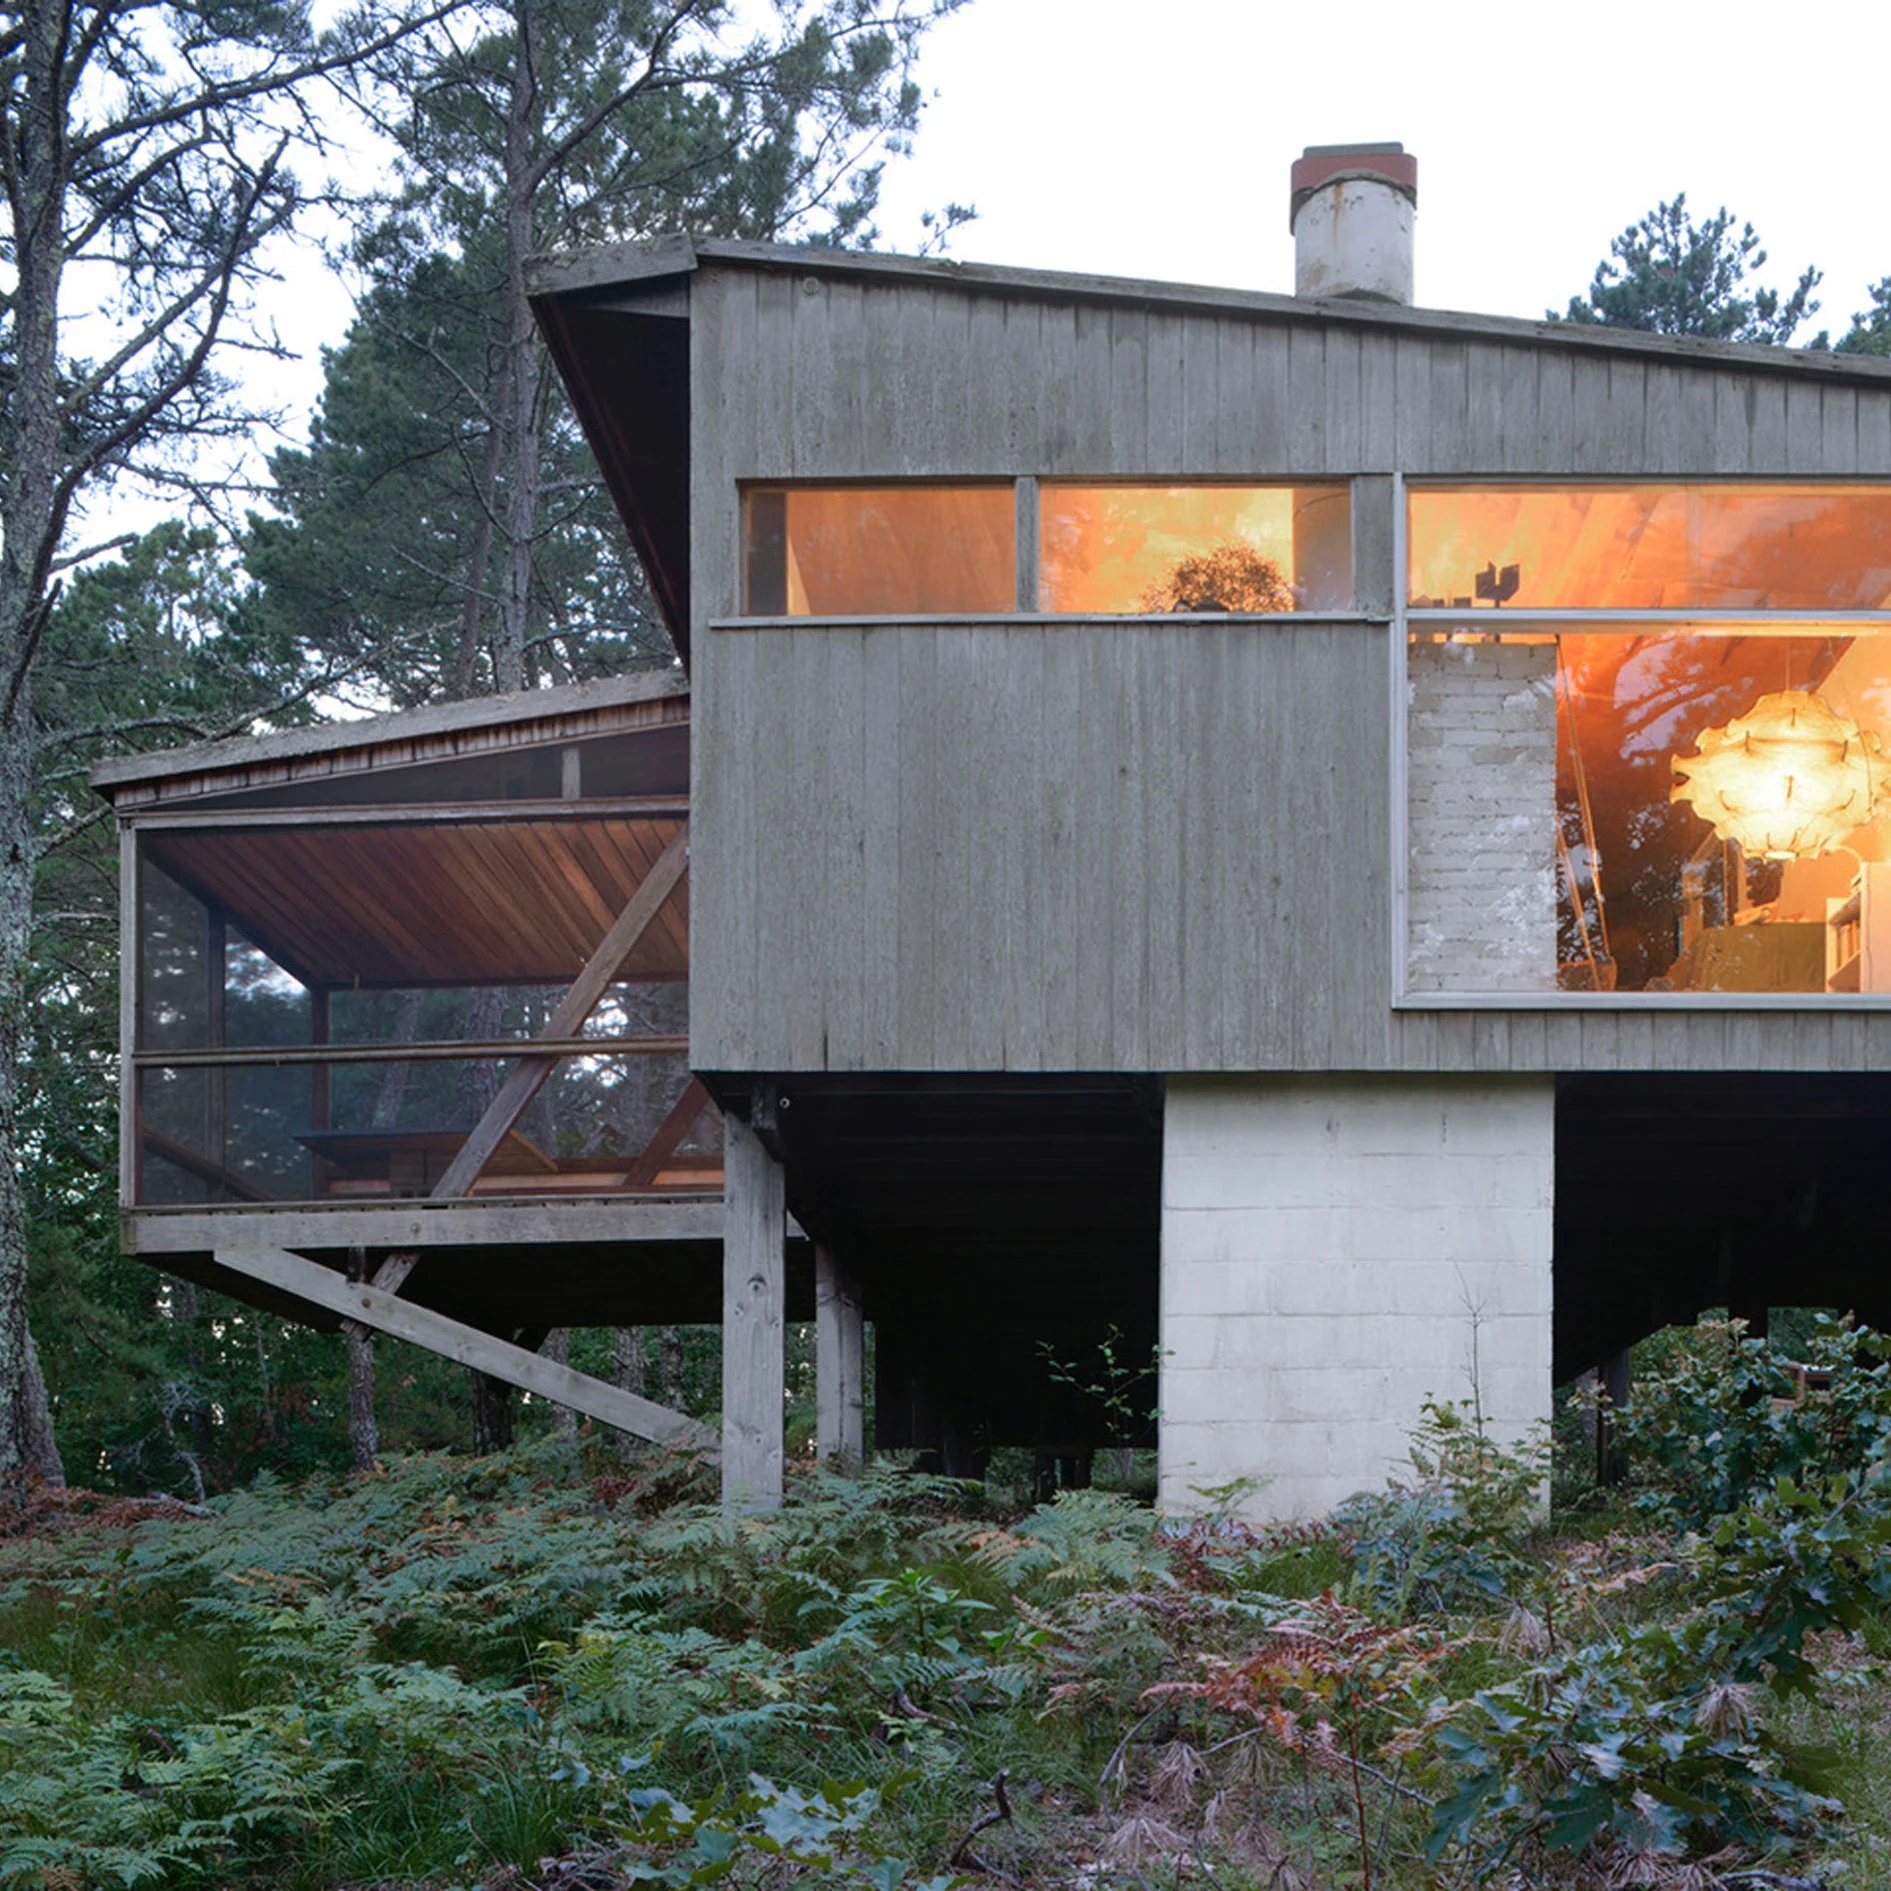 Campaign Launched To Save Marcel Breuer's Holiday Home From Demolition